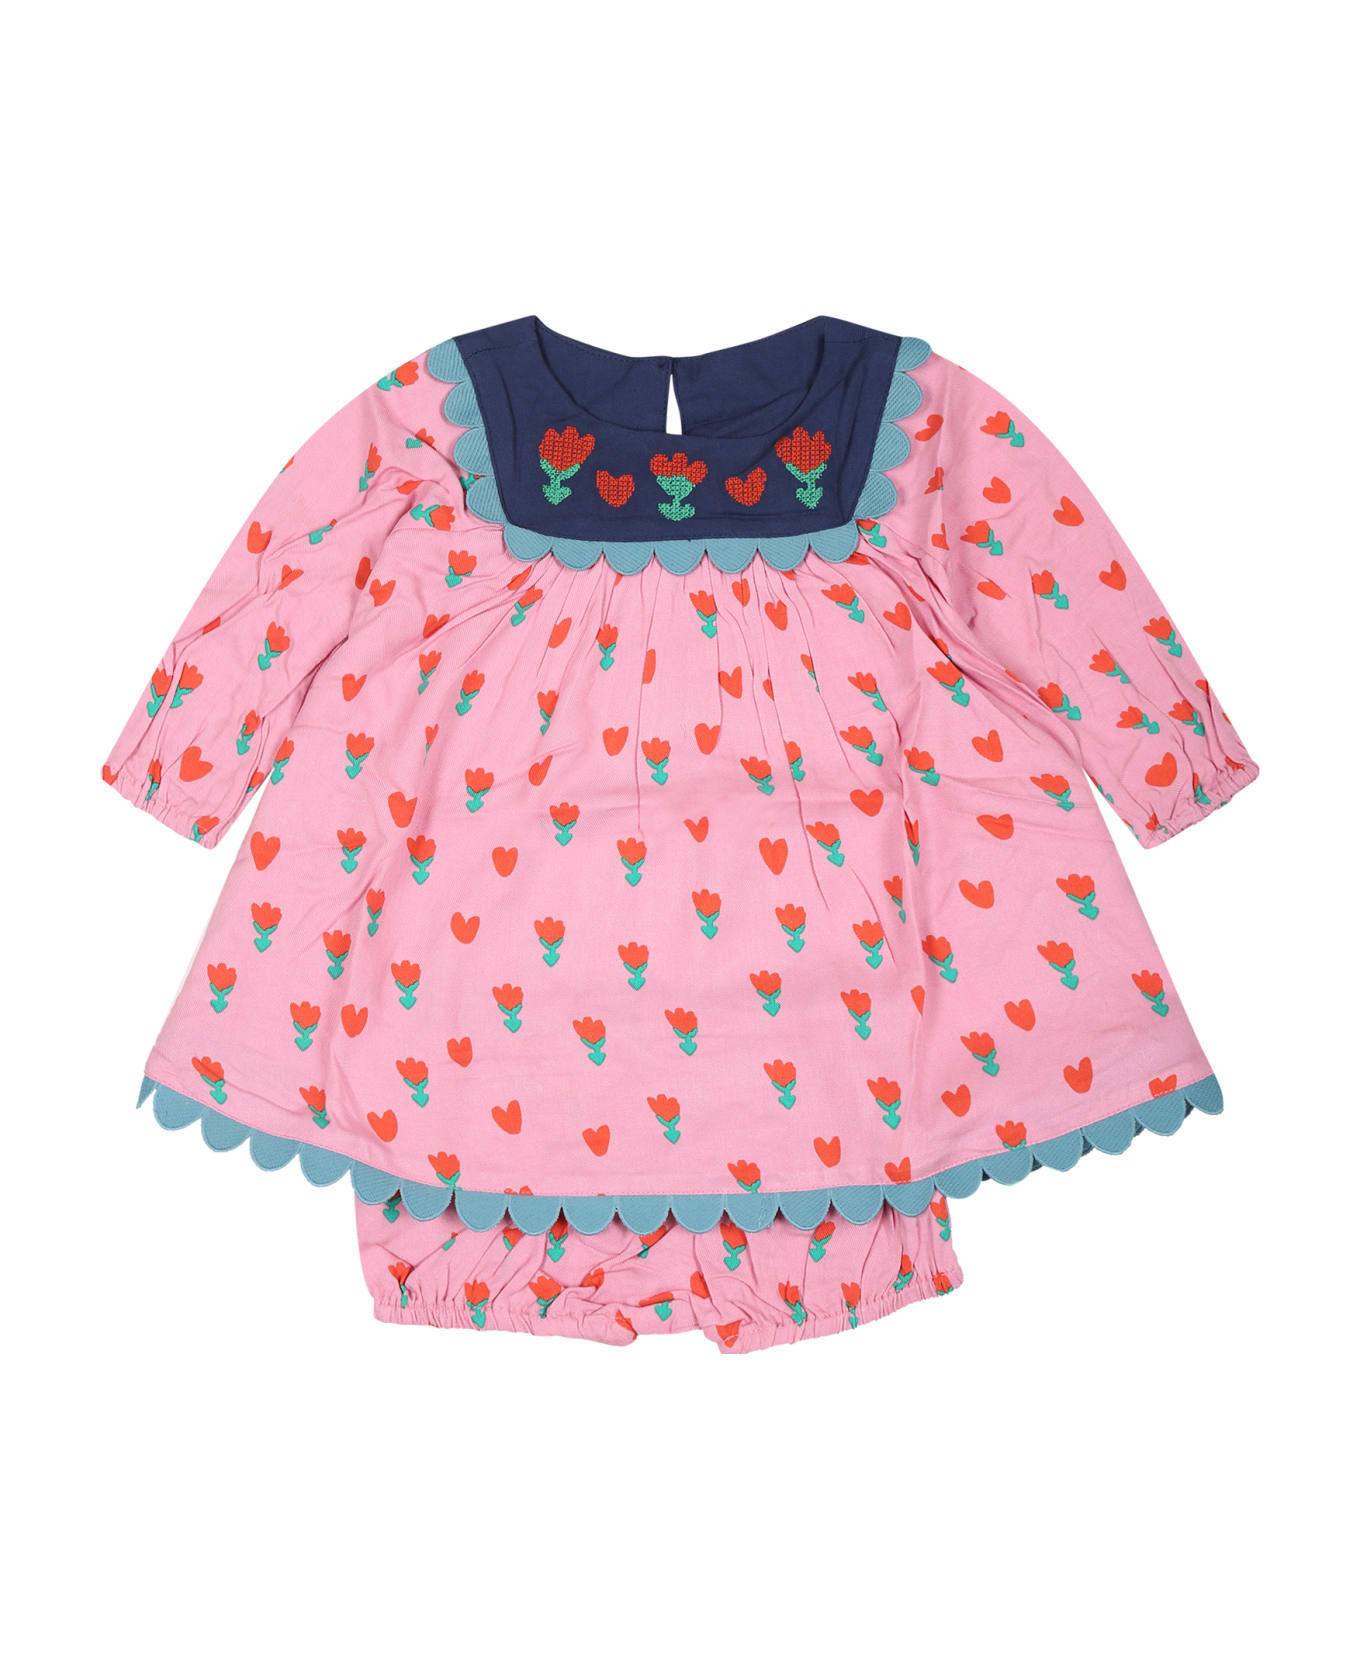 Stella McCartney Kids Pink Dress For Baby Girl With Tulip Print - Pink